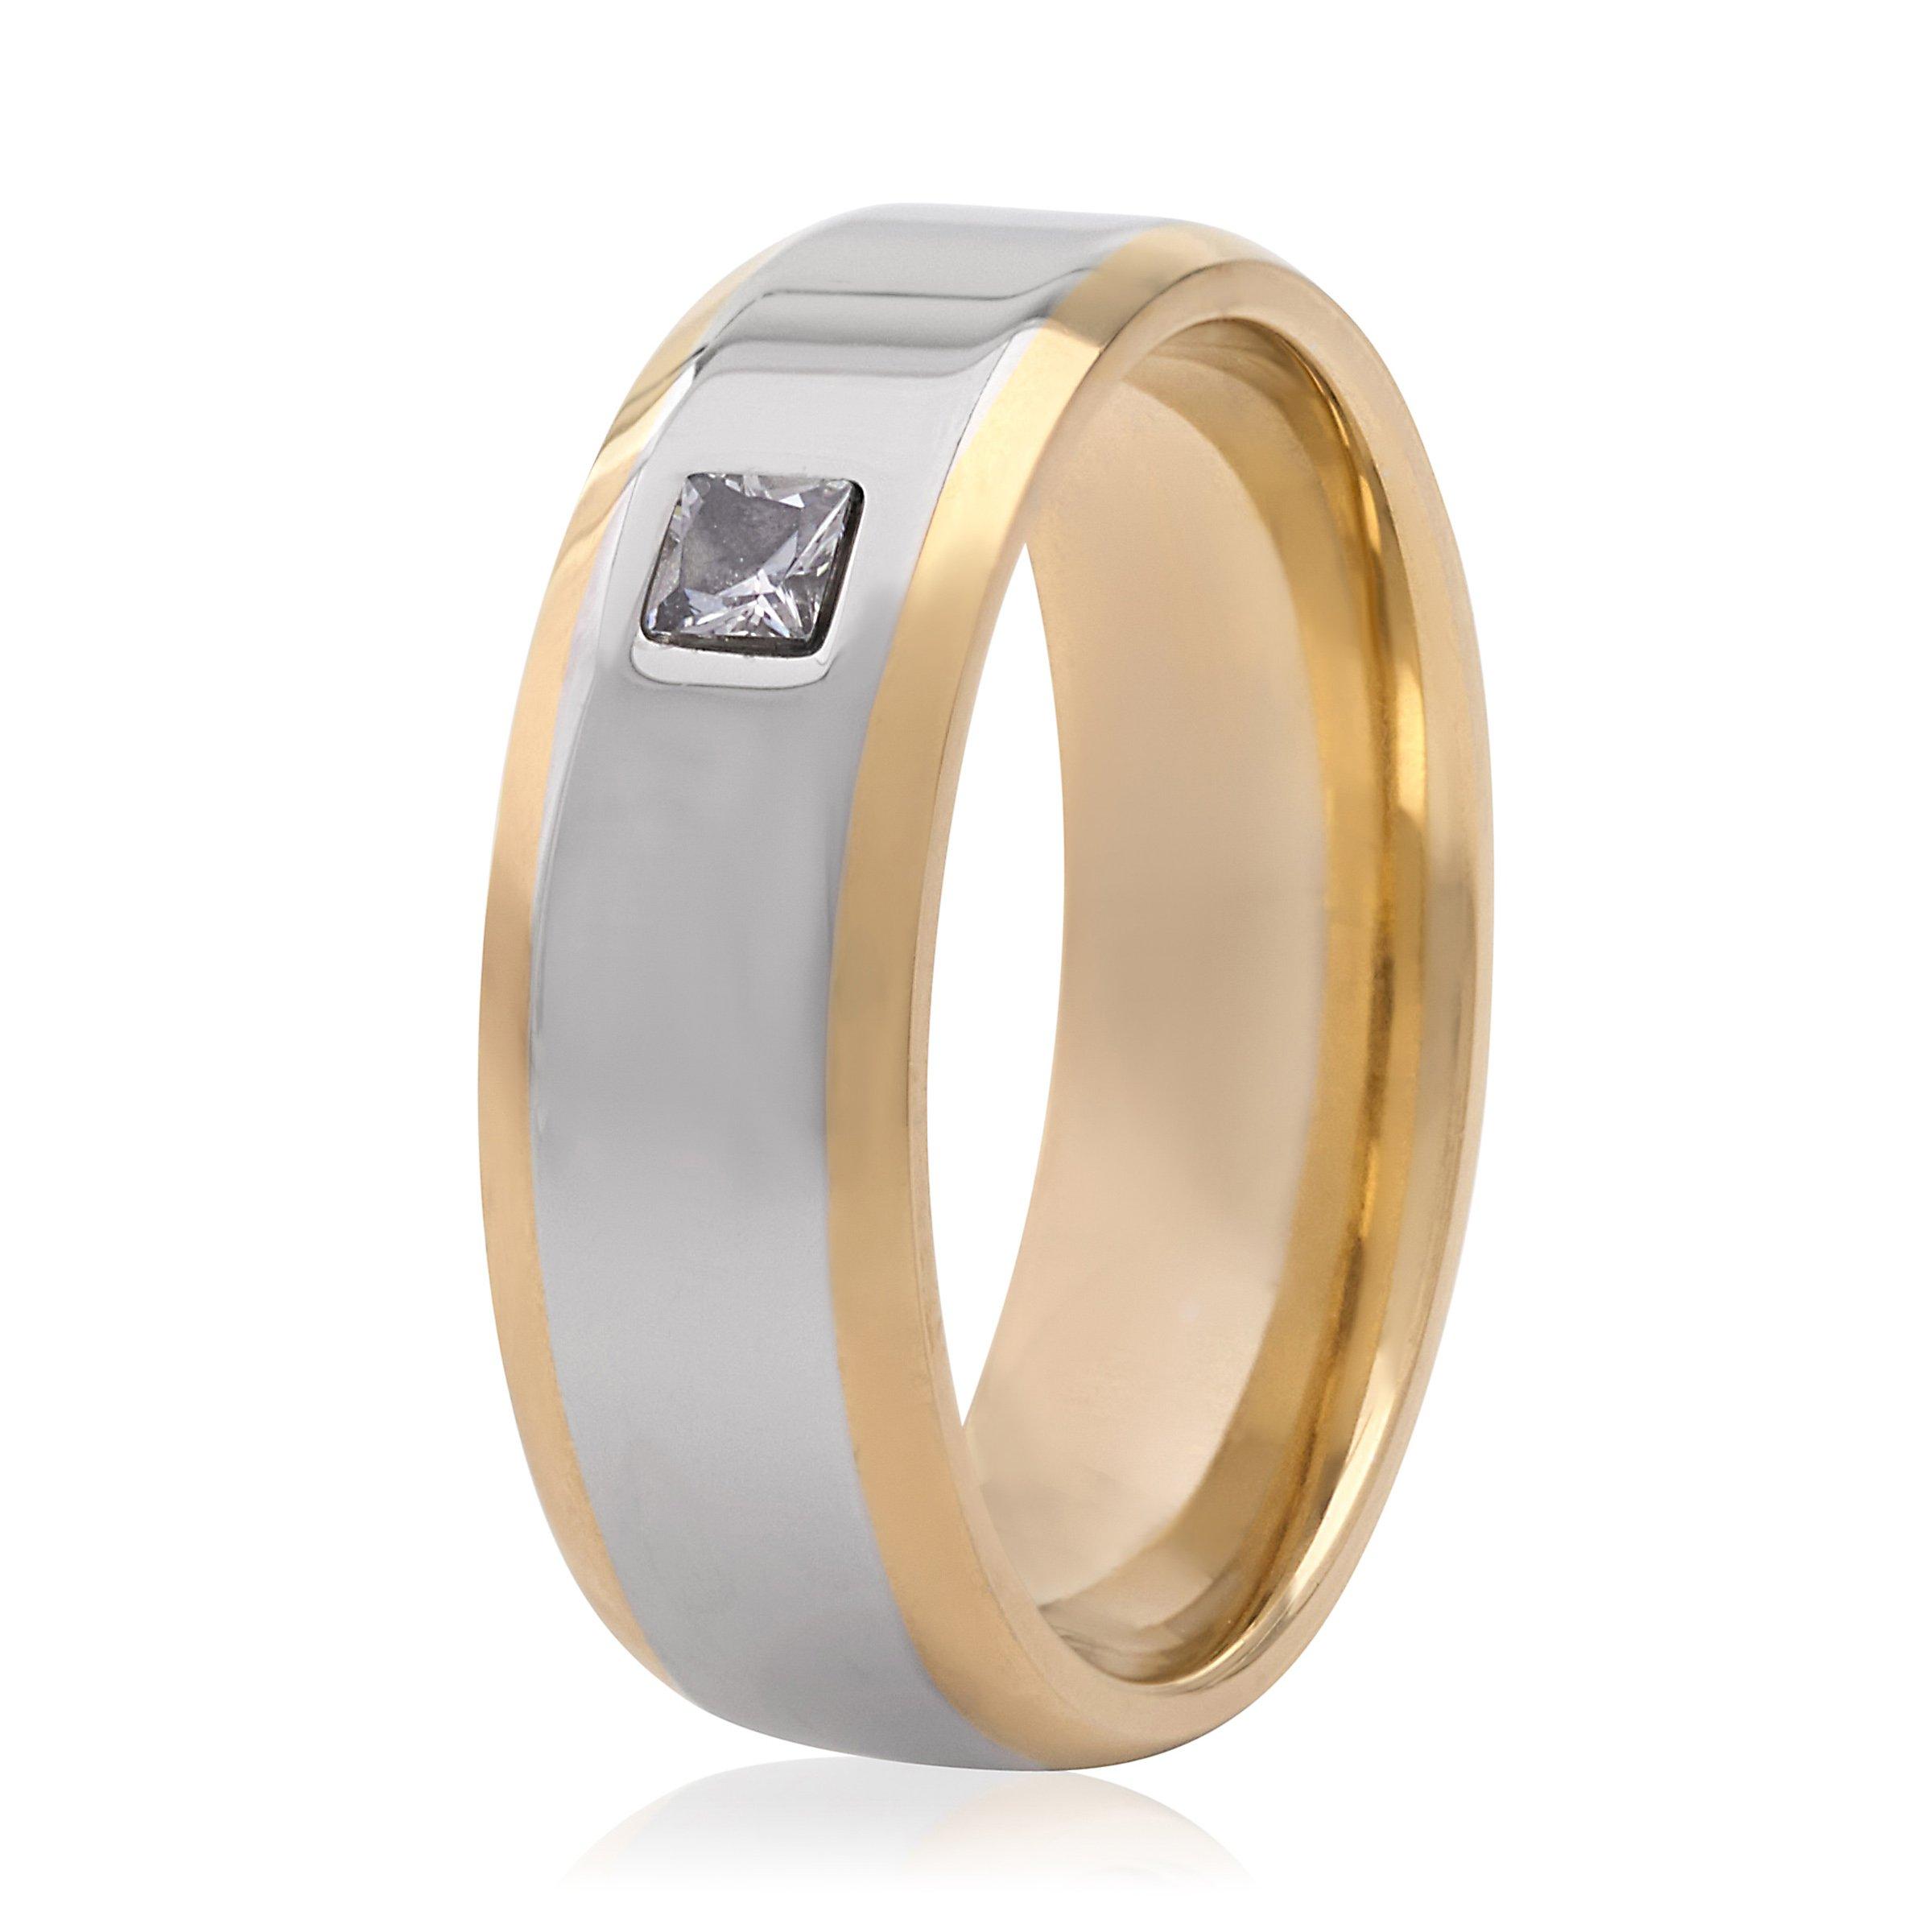 Buy Stainless Steel Broad Square CZ Ring Online | Truworths